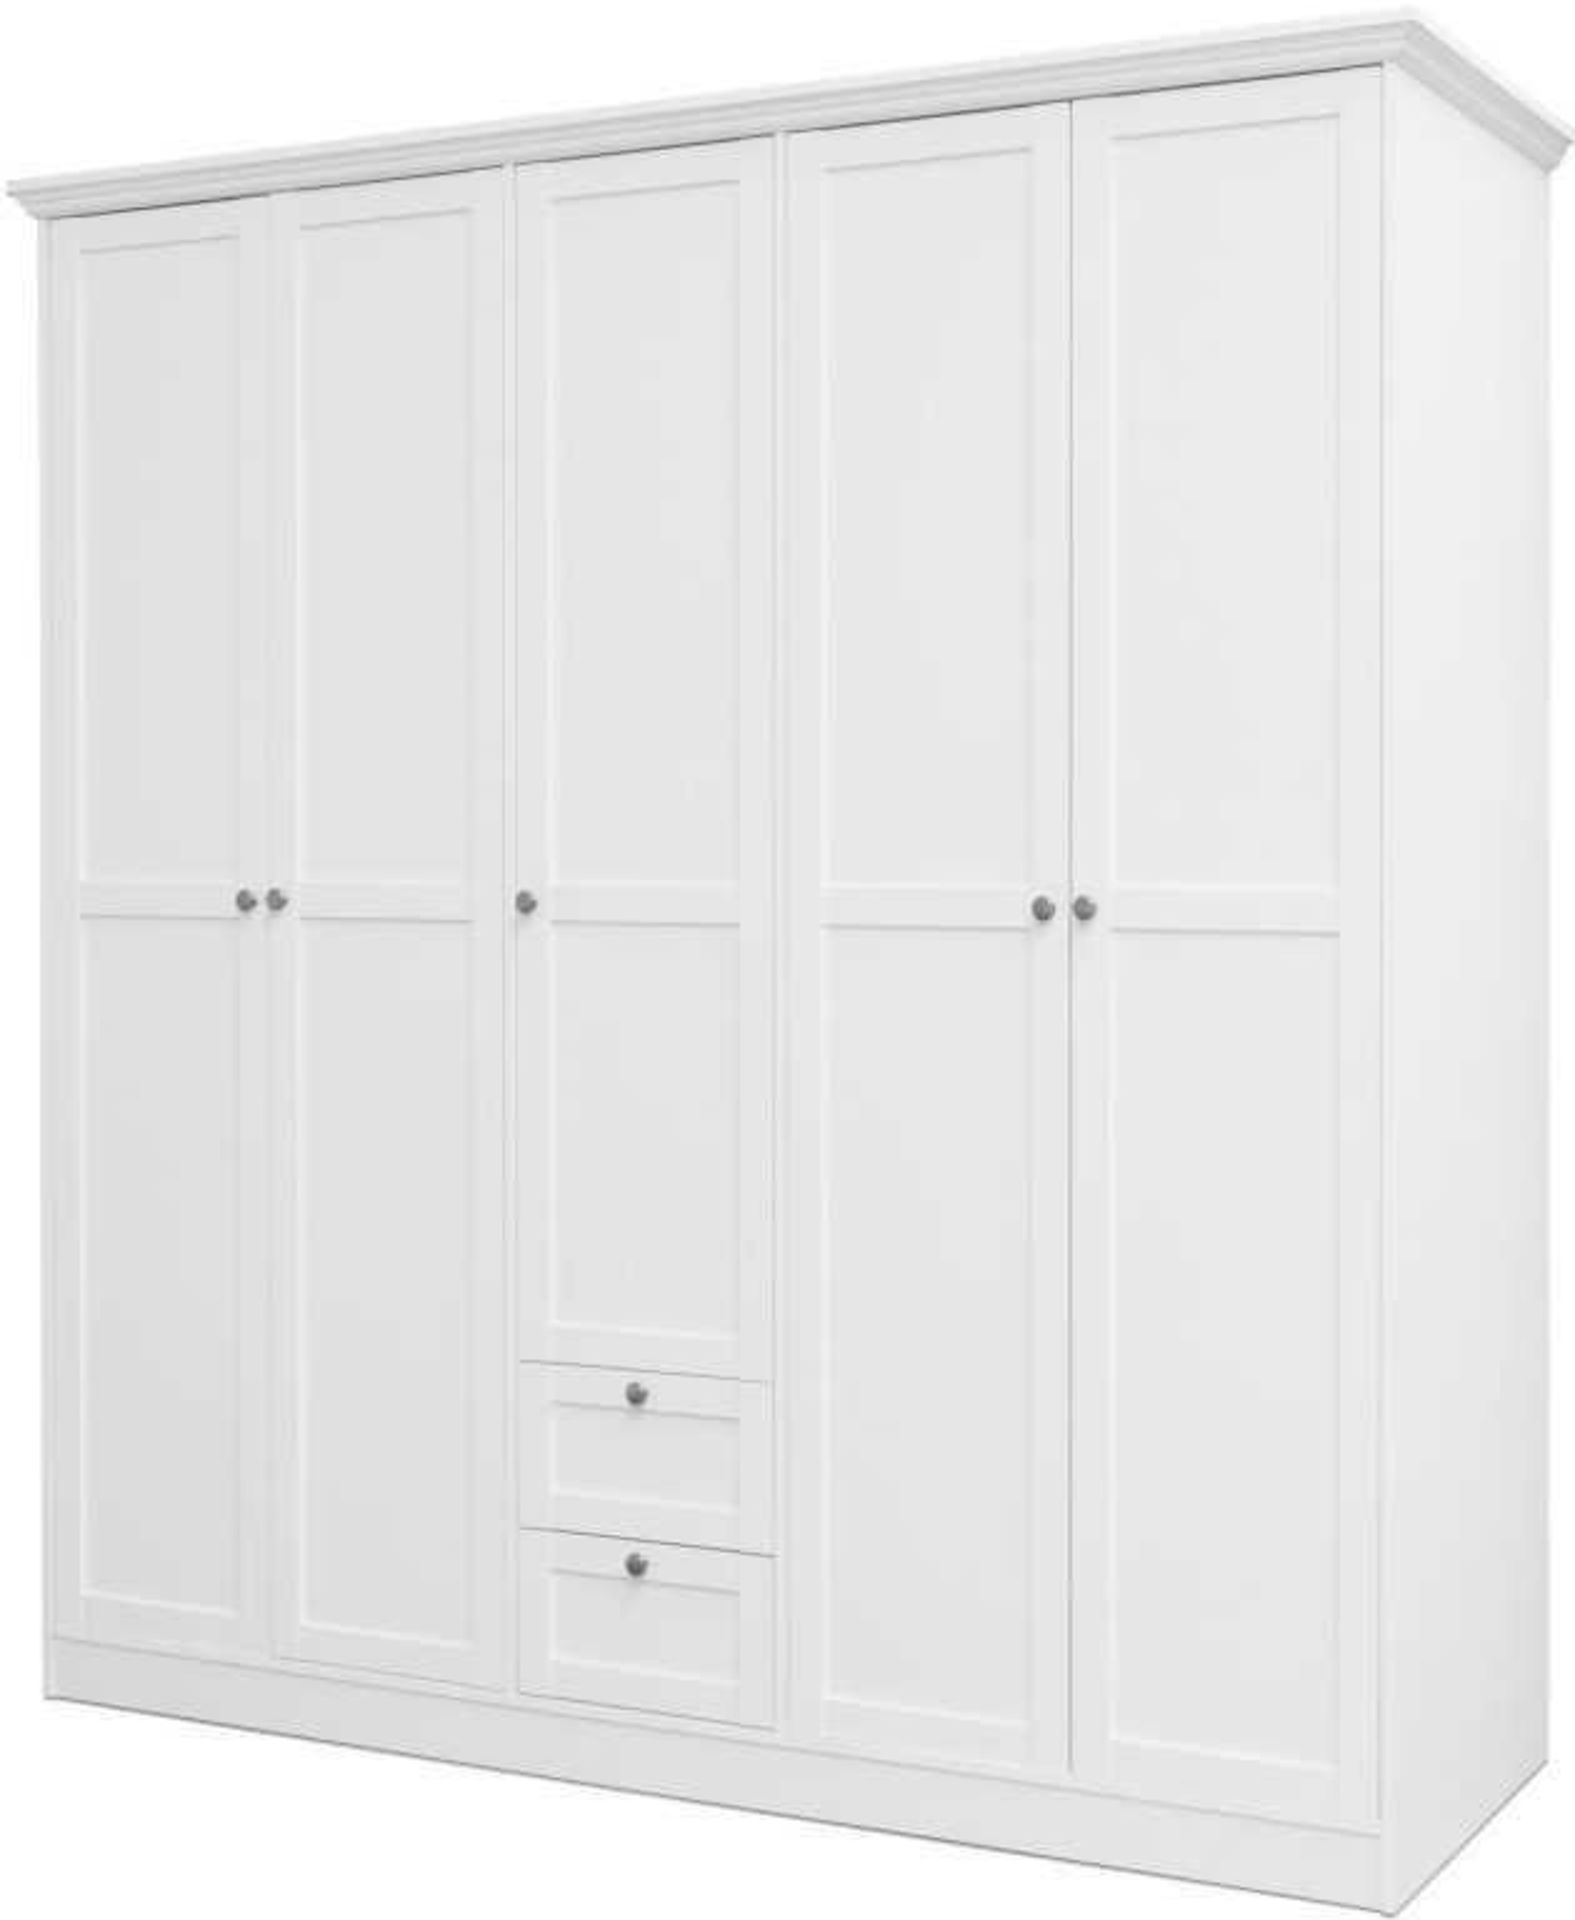 RRP £400 - Boxed 'Landwood 19' Large White Wardrobe With 5 Doors And 2 Drawers